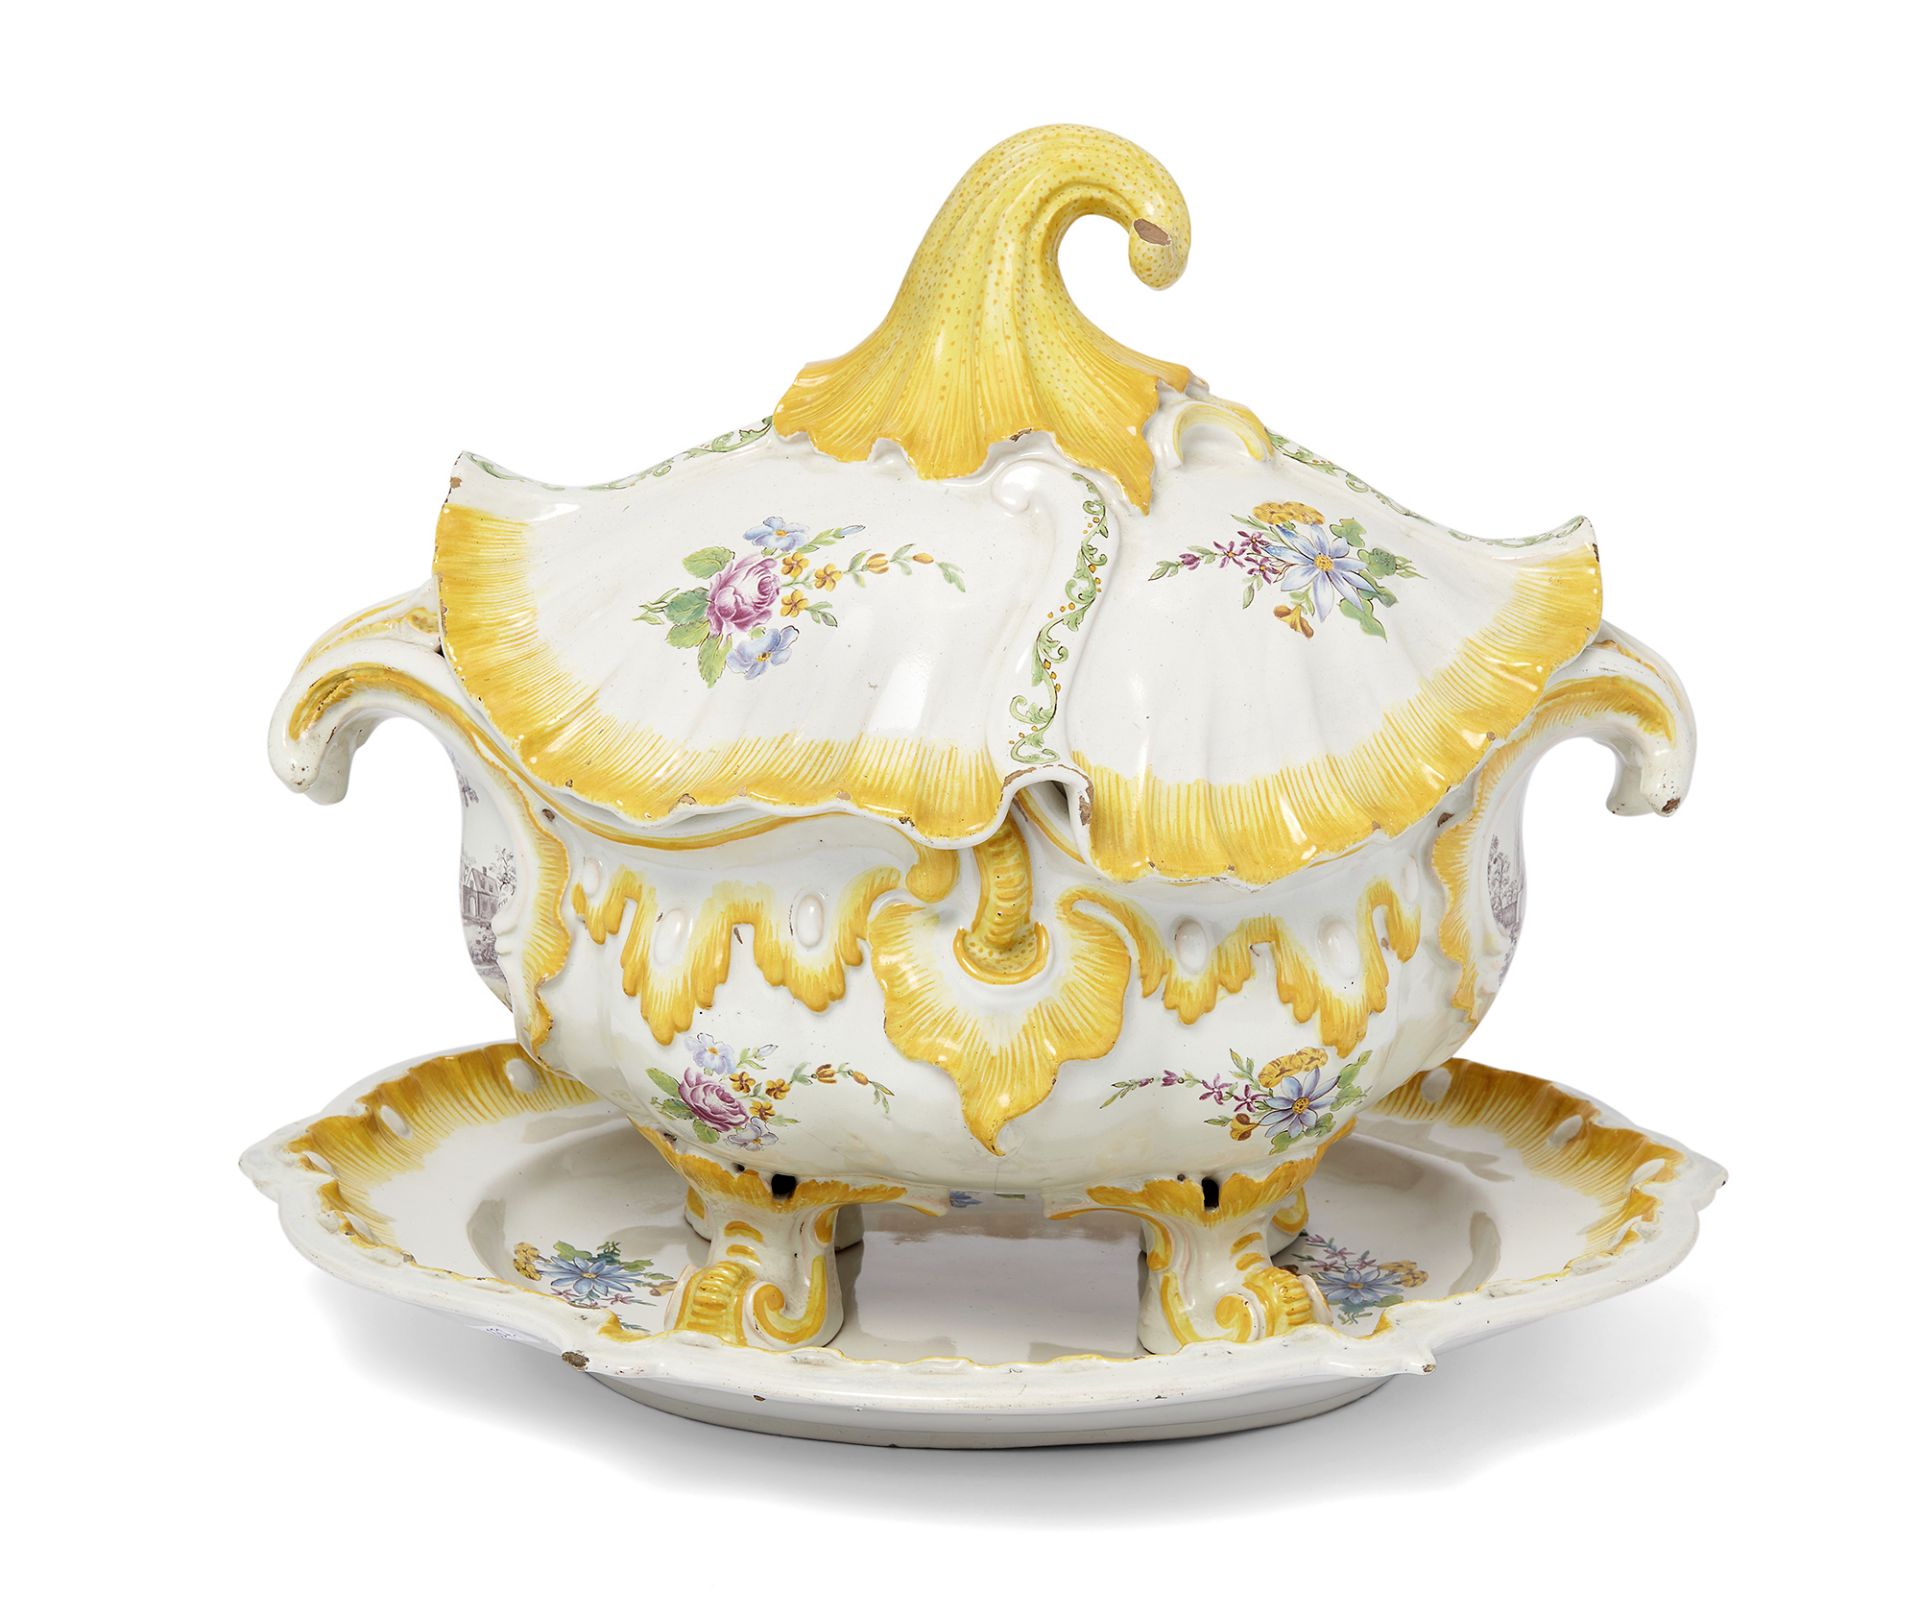 A Höchst fayence Rococo tureen, cover and stand, c.1750